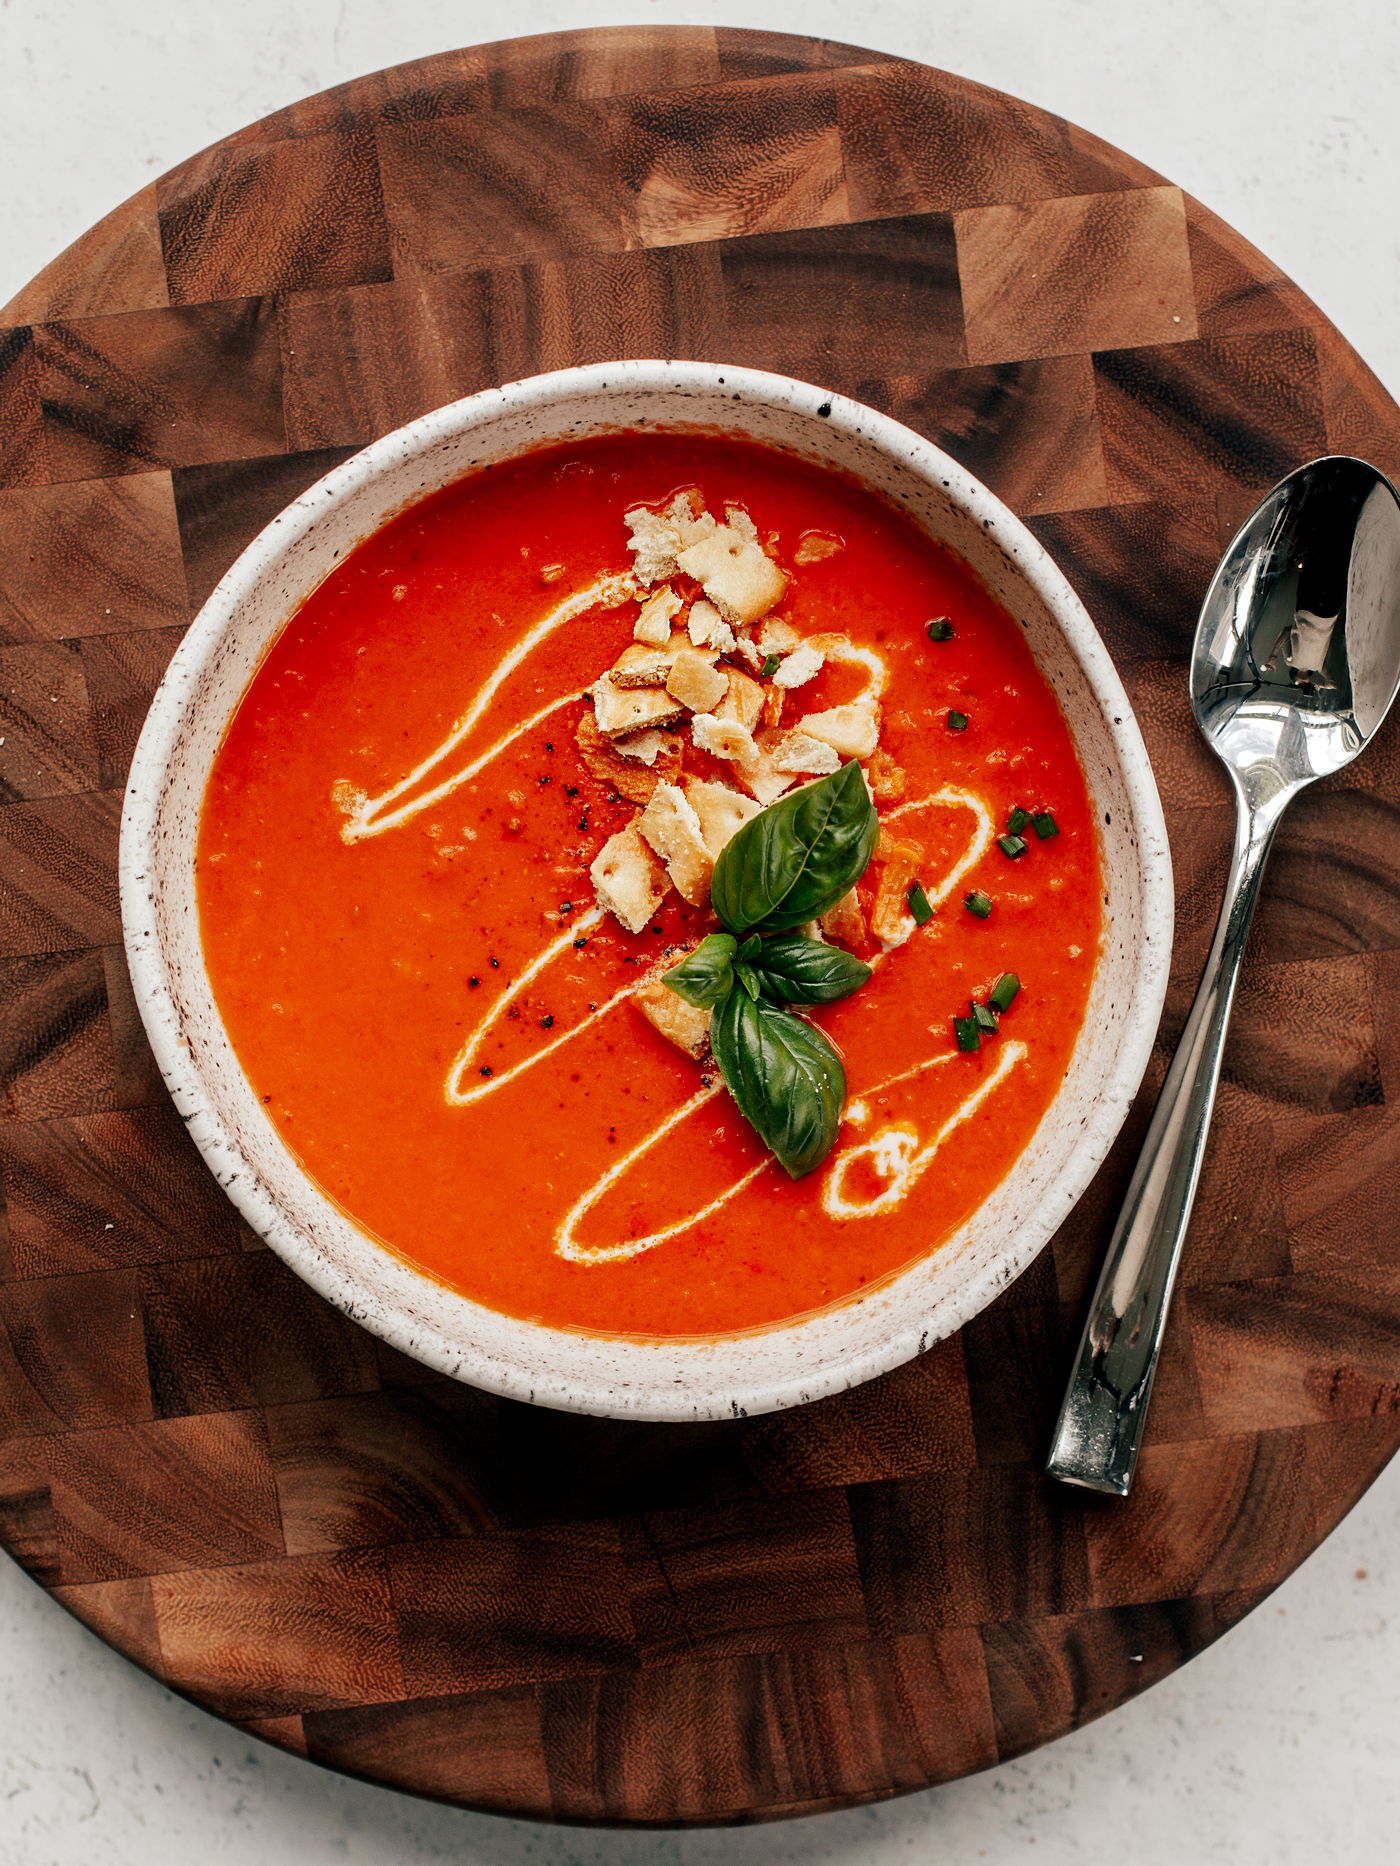 Bowl of tomato soup with cream drizzle, crushed crackers, and basil leaves.